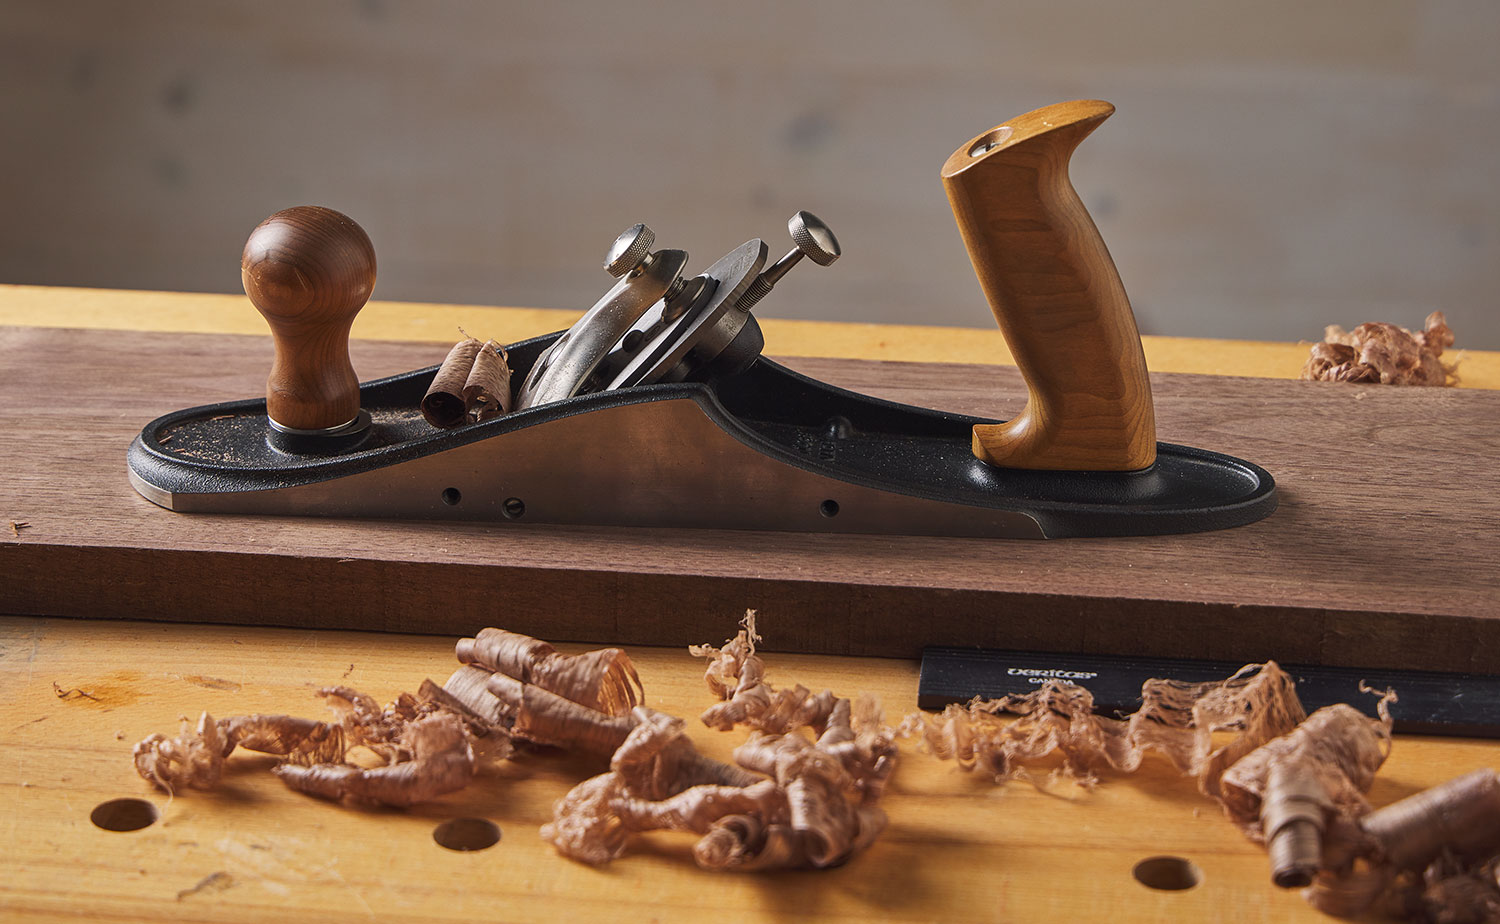 Veritas custom #5 jack plane on a board surrounded by shavings